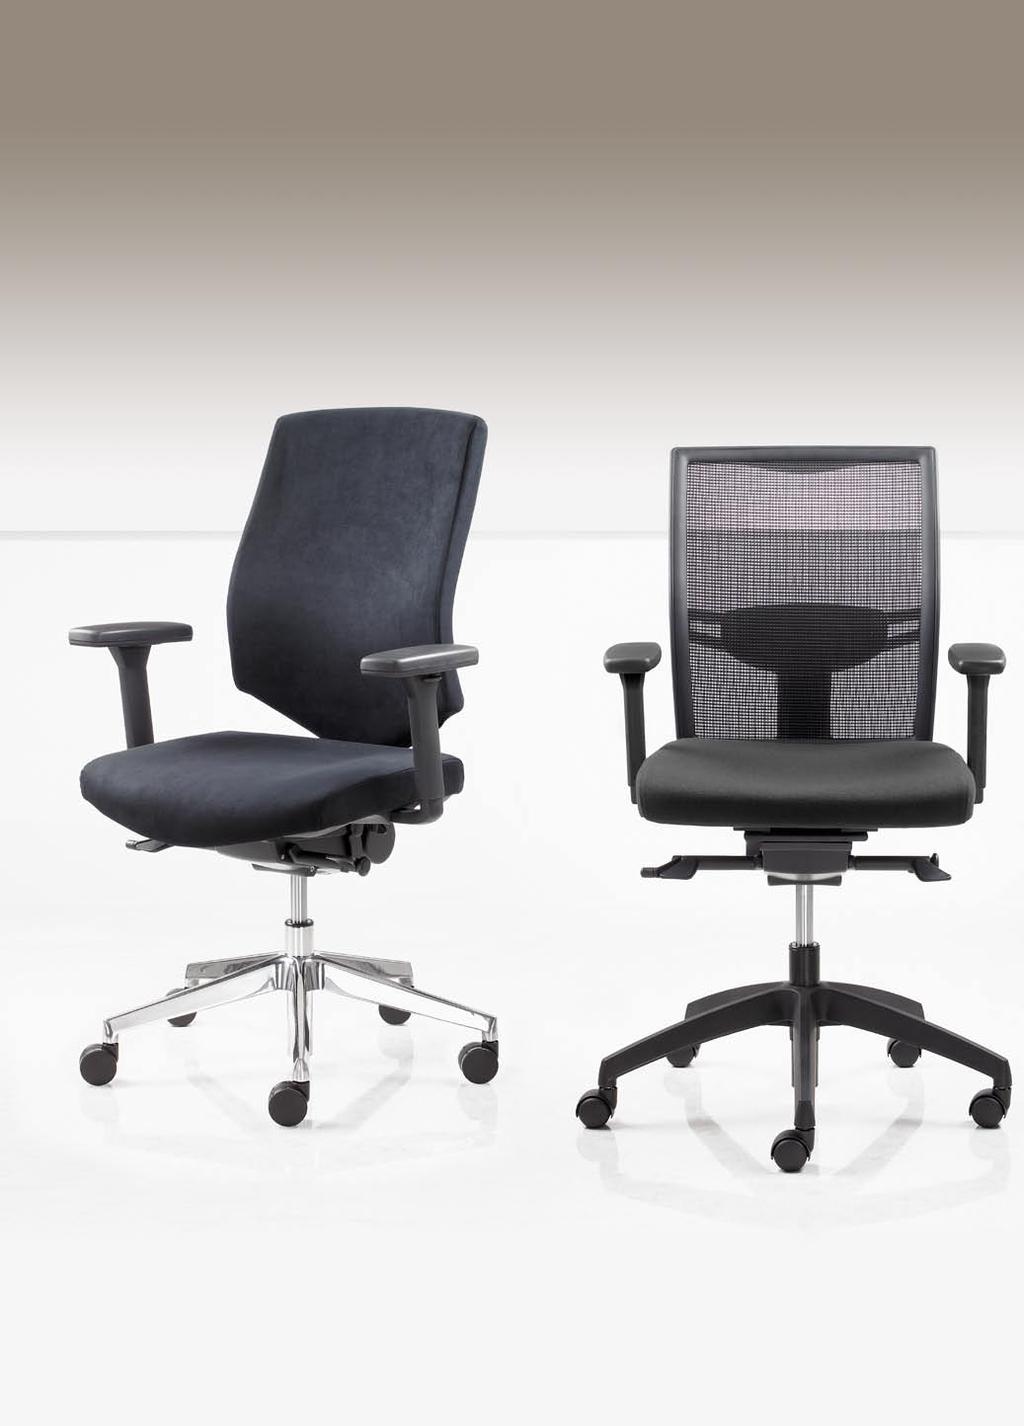 Working Chairs G-Series G-Series comprises four working chairs with accompanying visitors/meeting chairs. Each chair is available in a variety of configurations outlined on the following pages.